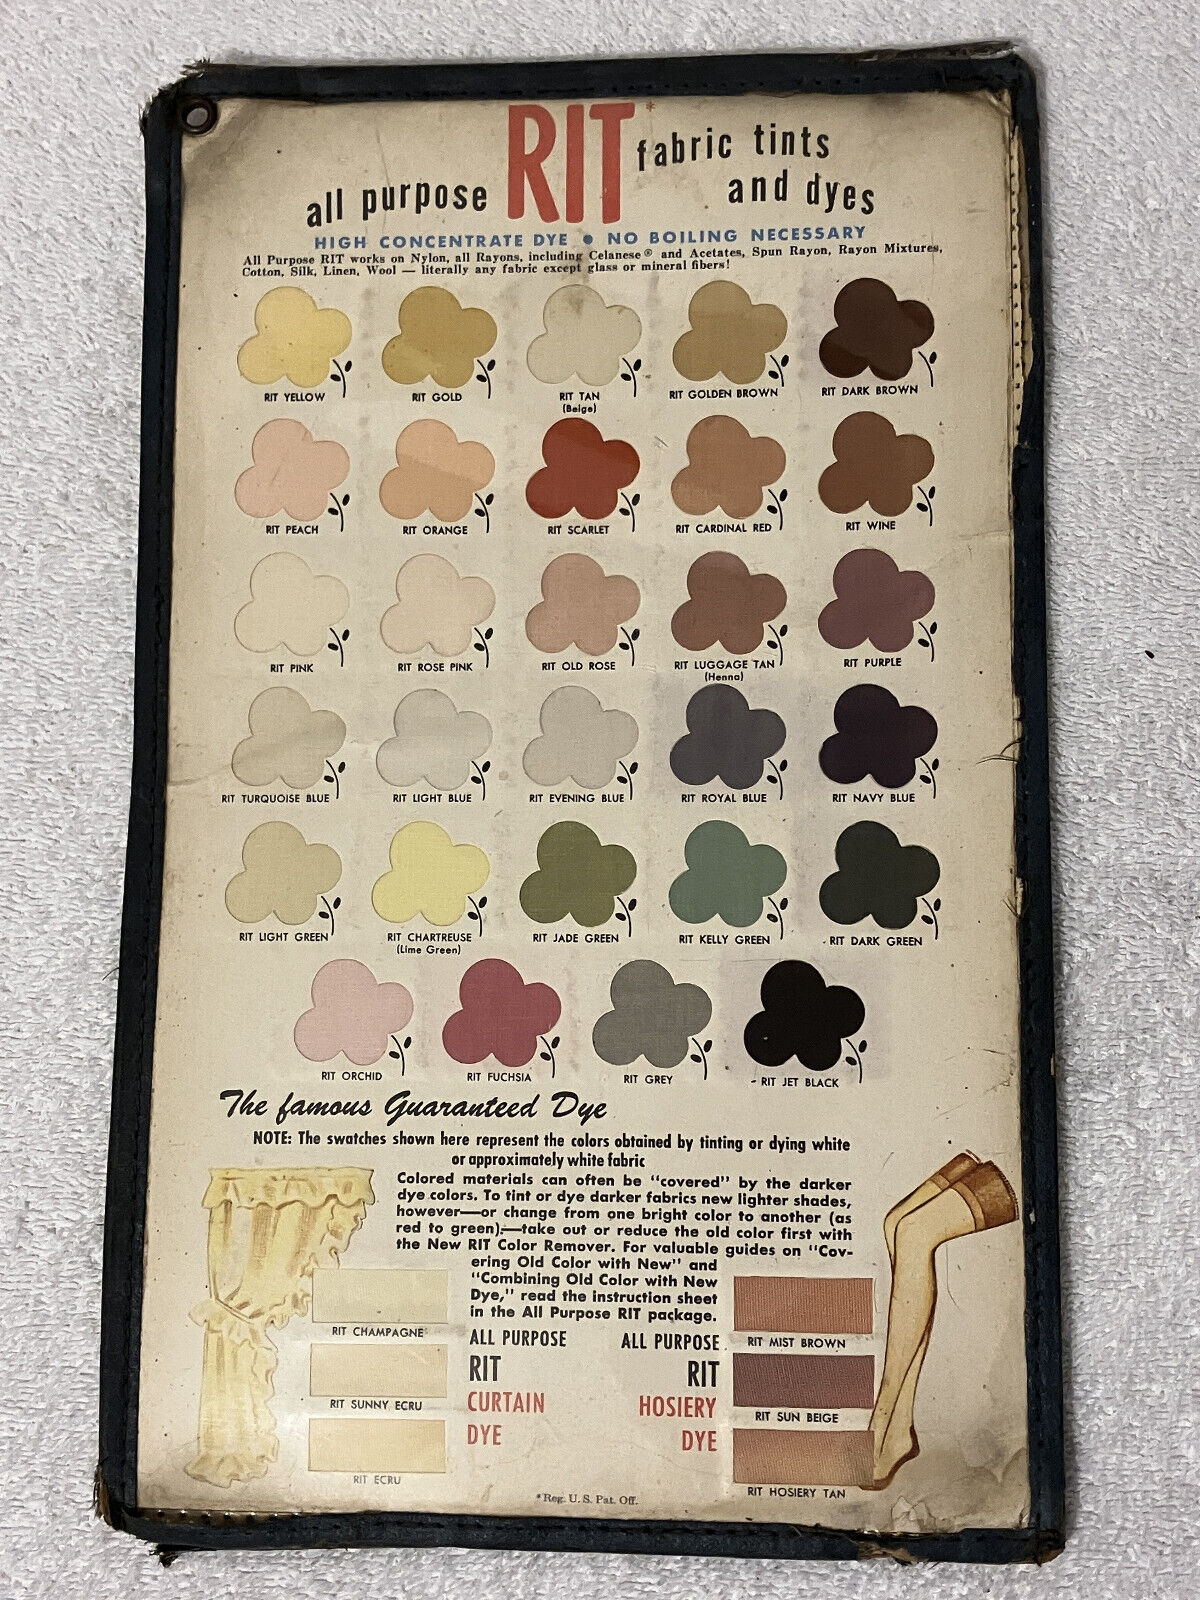 Vintage RIT COLOR DYE STORE ADVERTISING DISPLAY Cardboard and Plastic w Swatches